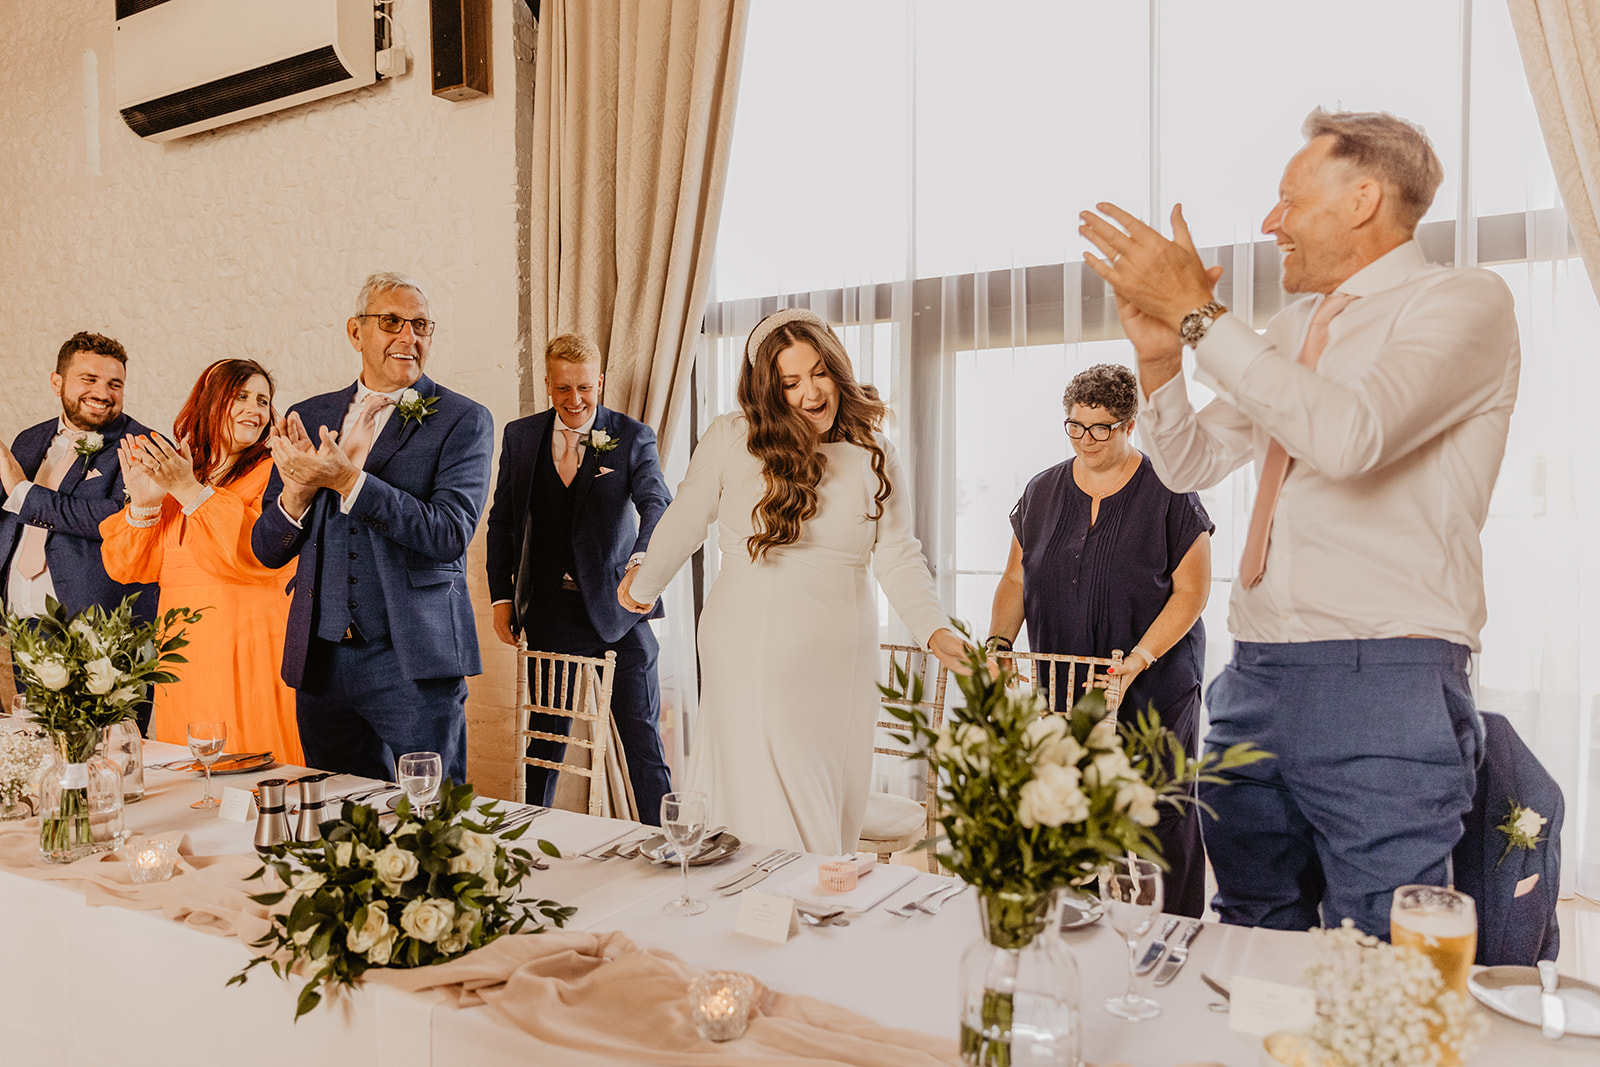 Wedding Reception Speeches at a Field Place Manor House Wedding in Worthing, Sussex. By Olive Joy Photography